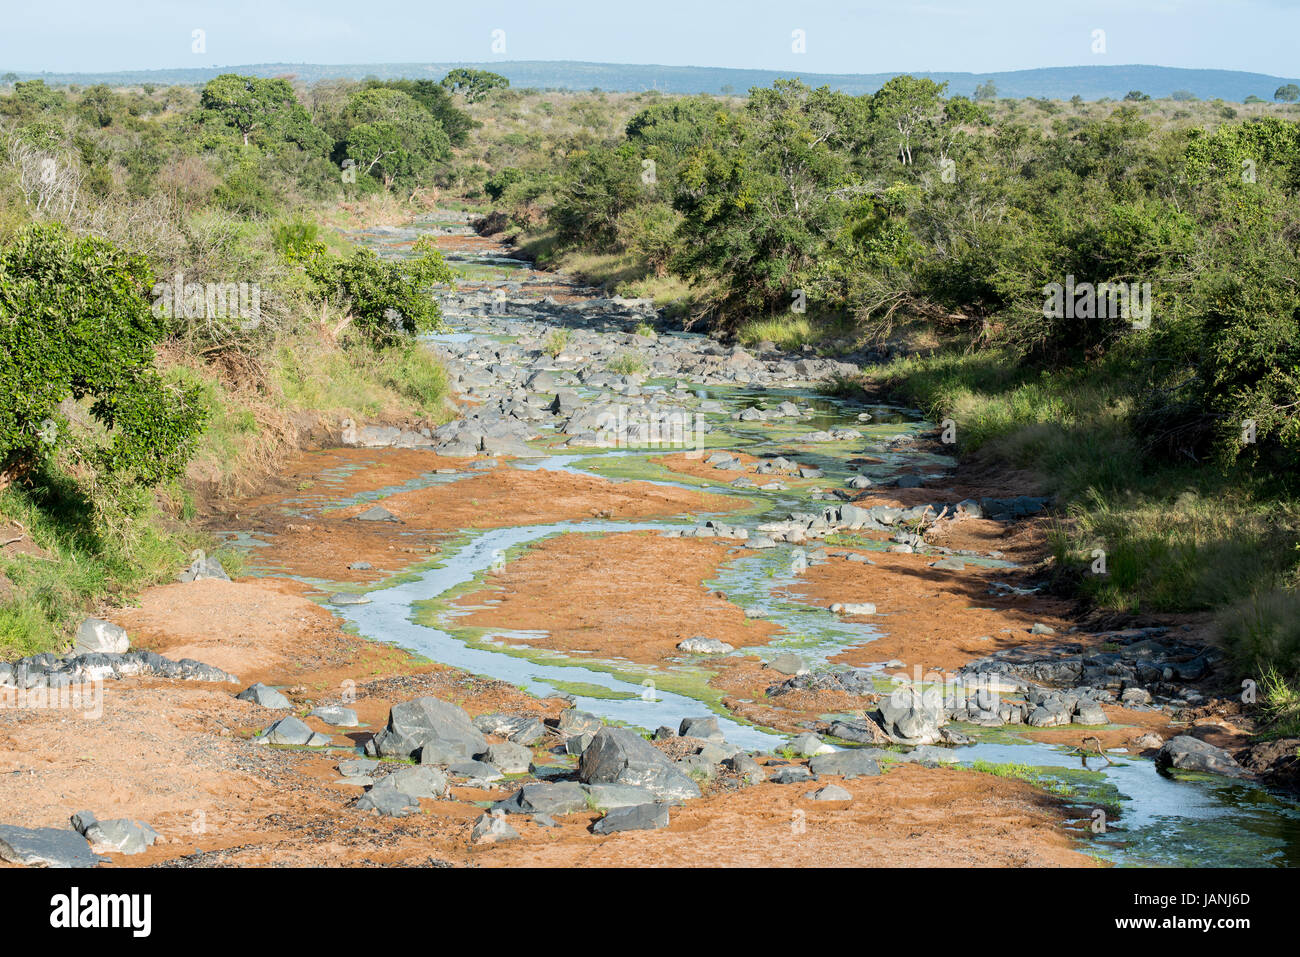 Scenic landscape of just a trickle of water in one of the rivers in the Kruger National Park Stock Photo